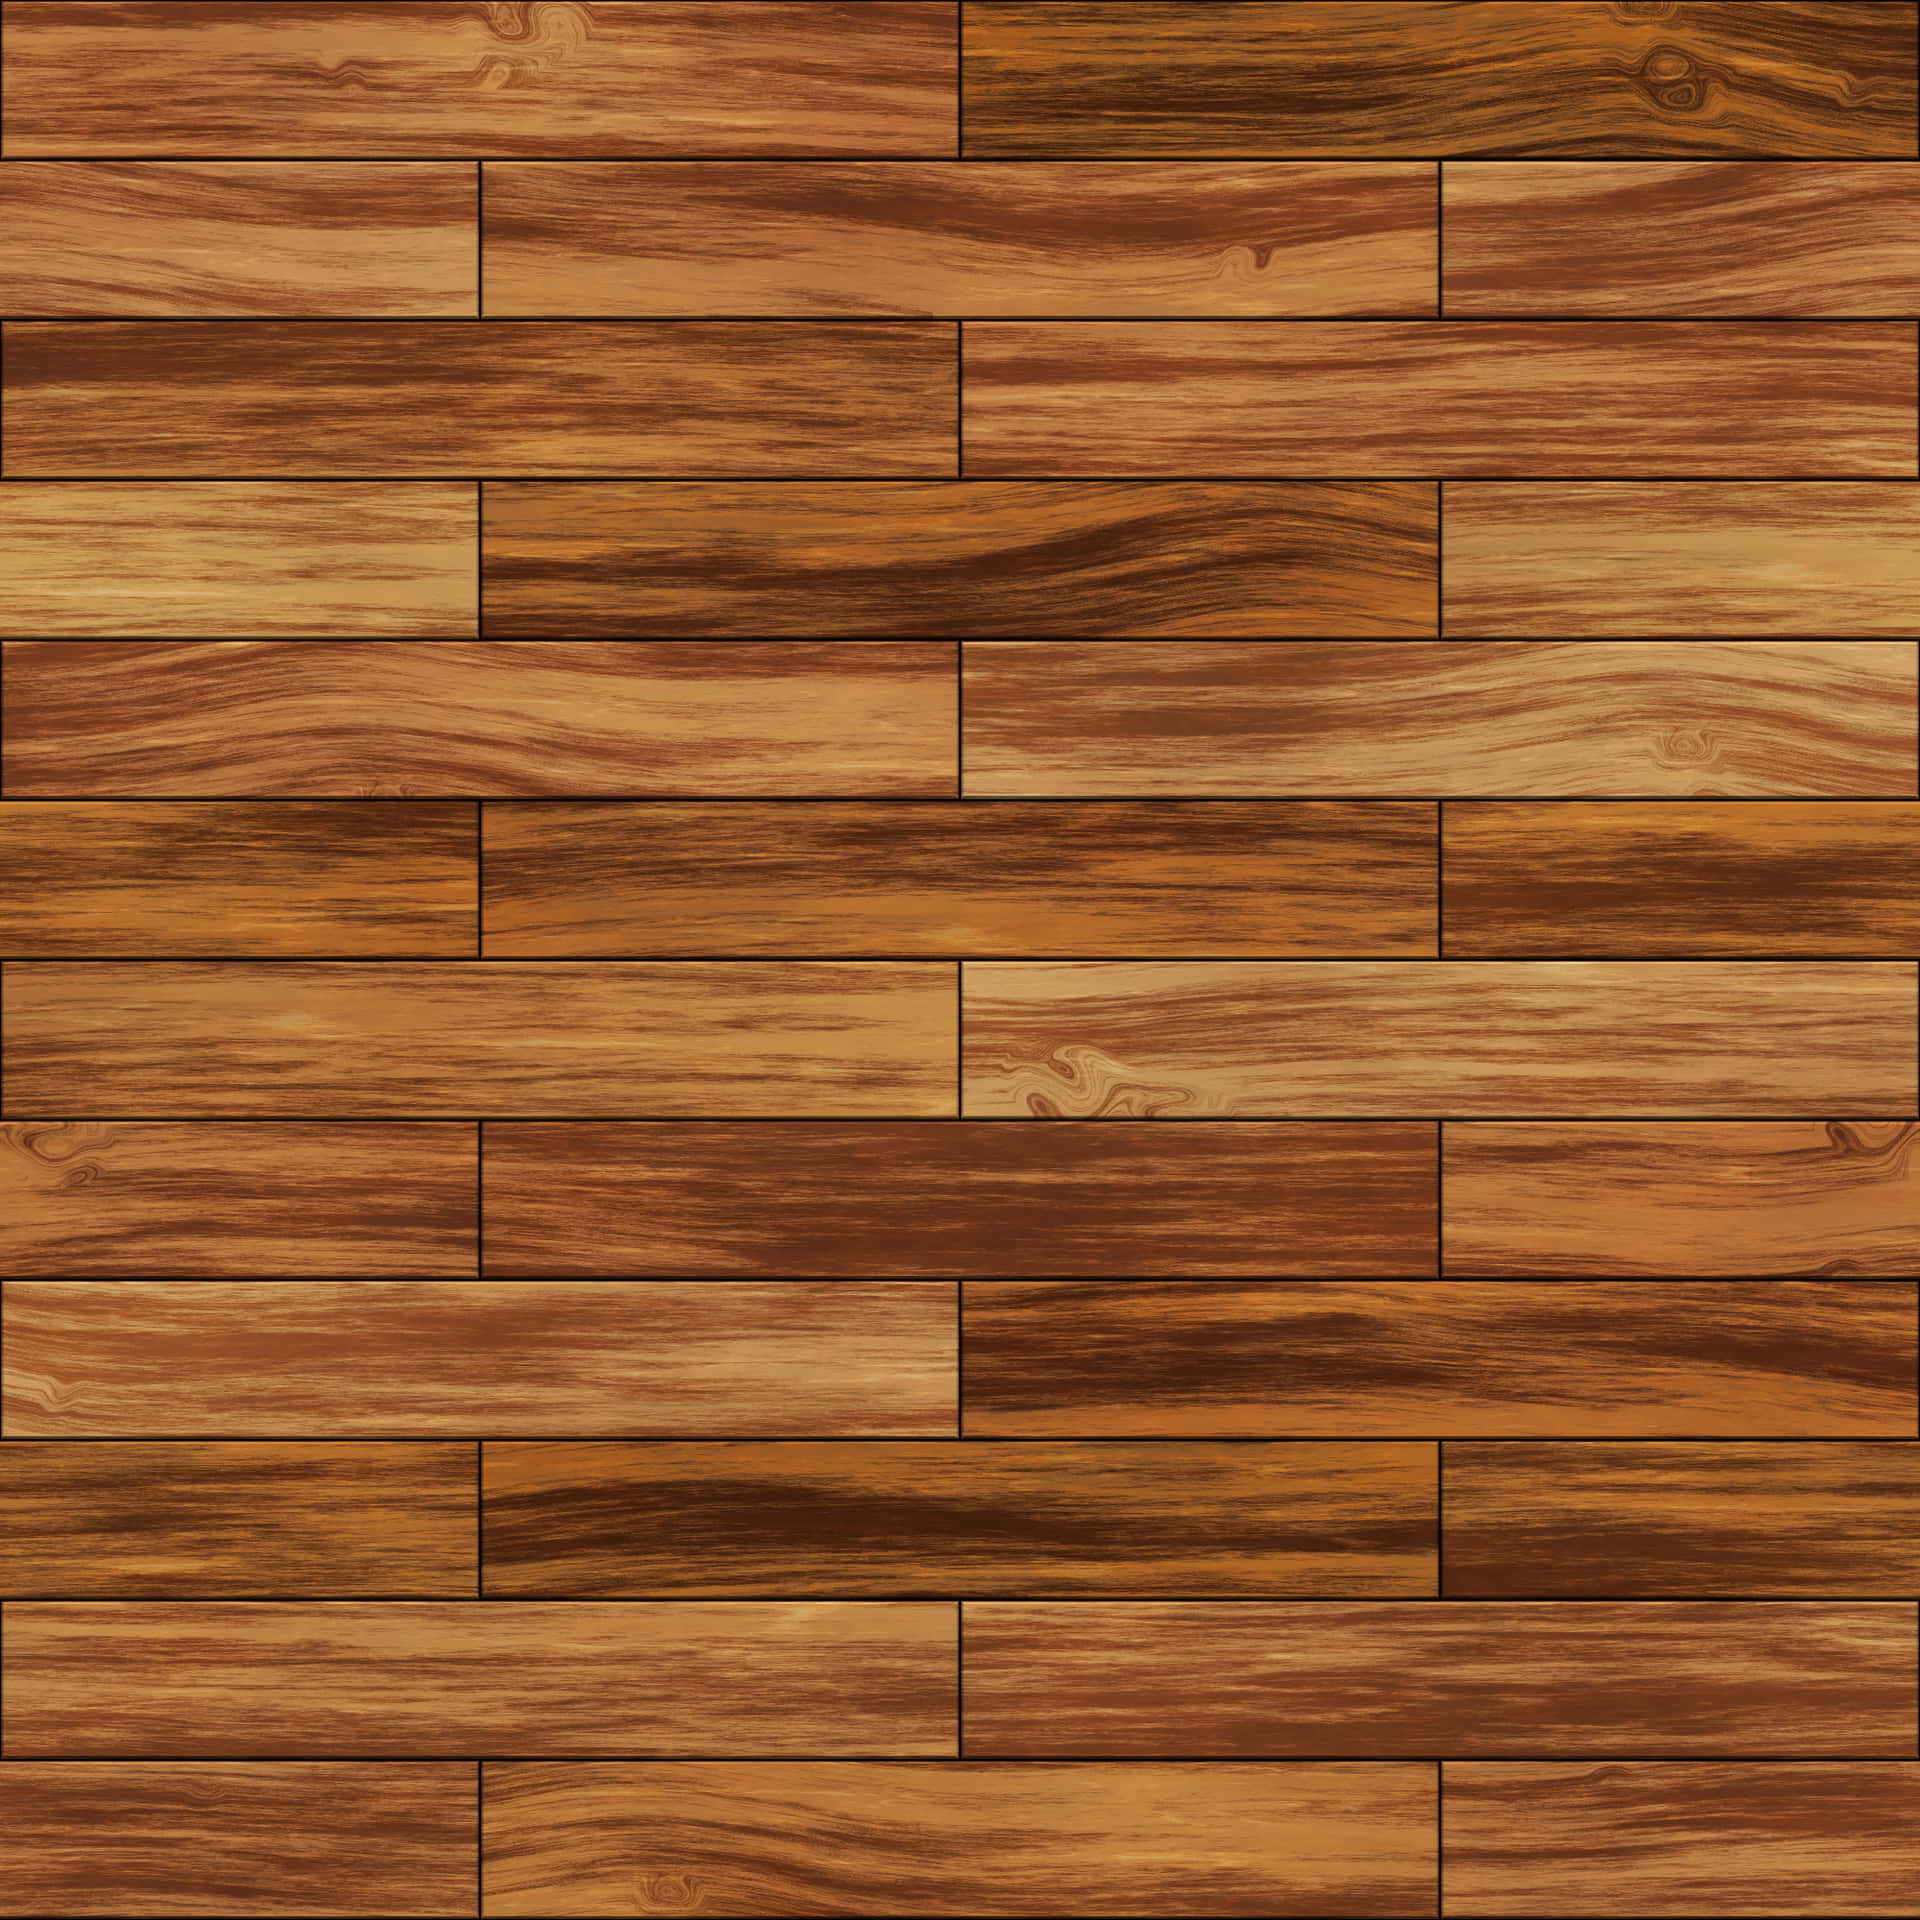 A Wooden Floor With Brown And Brown Colors